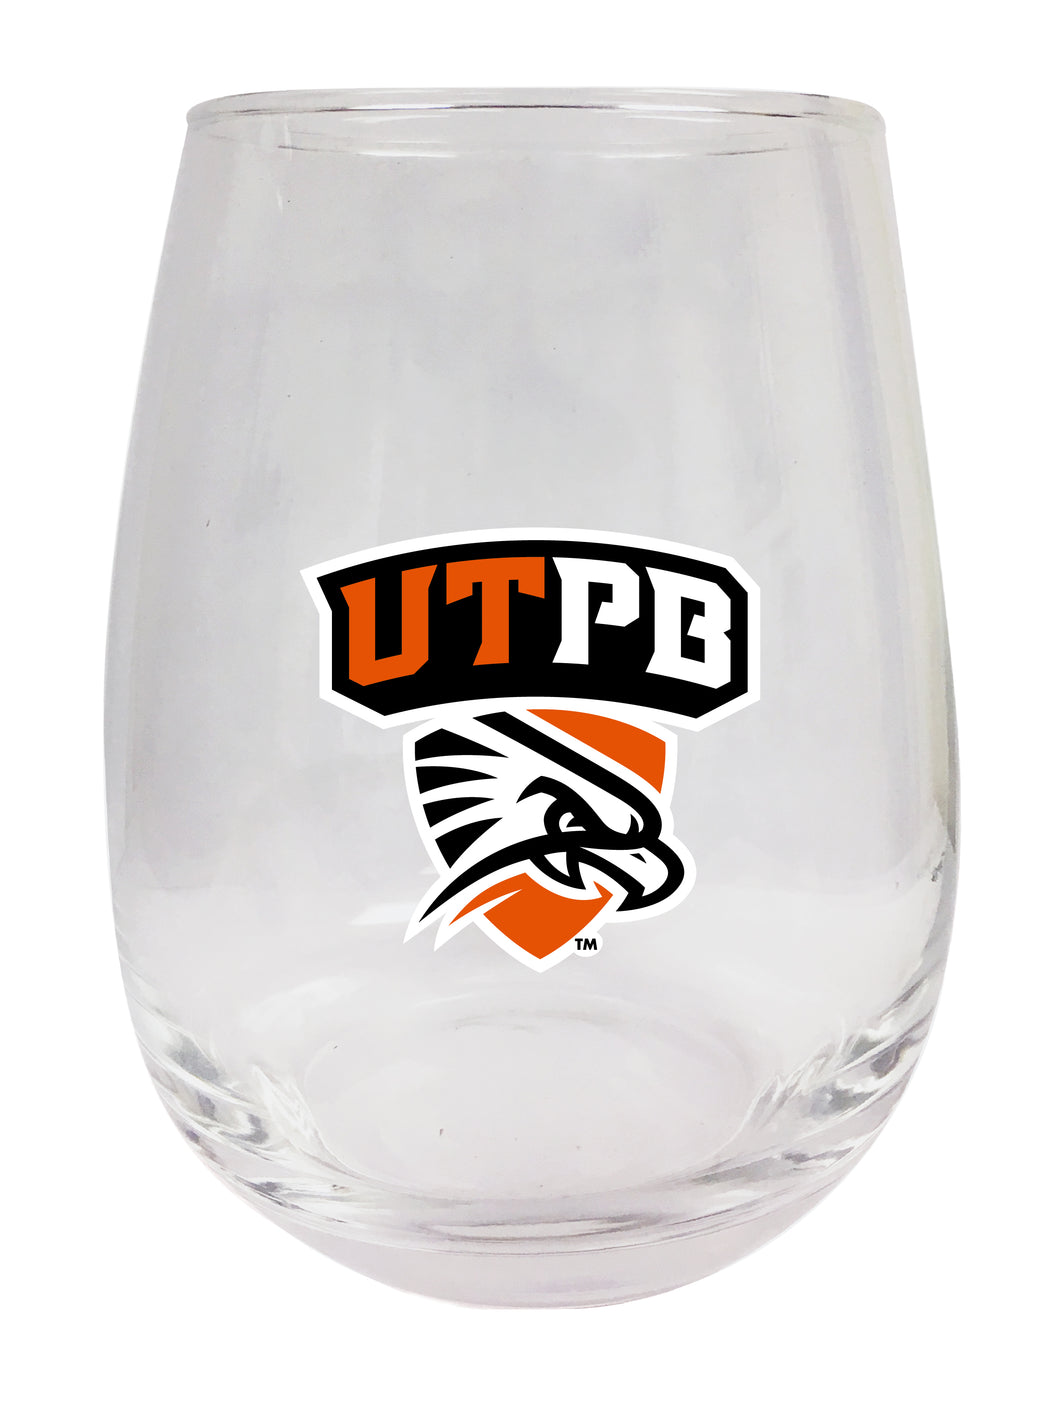 University of Texas of the Permian Basin 9 oz Stemless Wine Glass